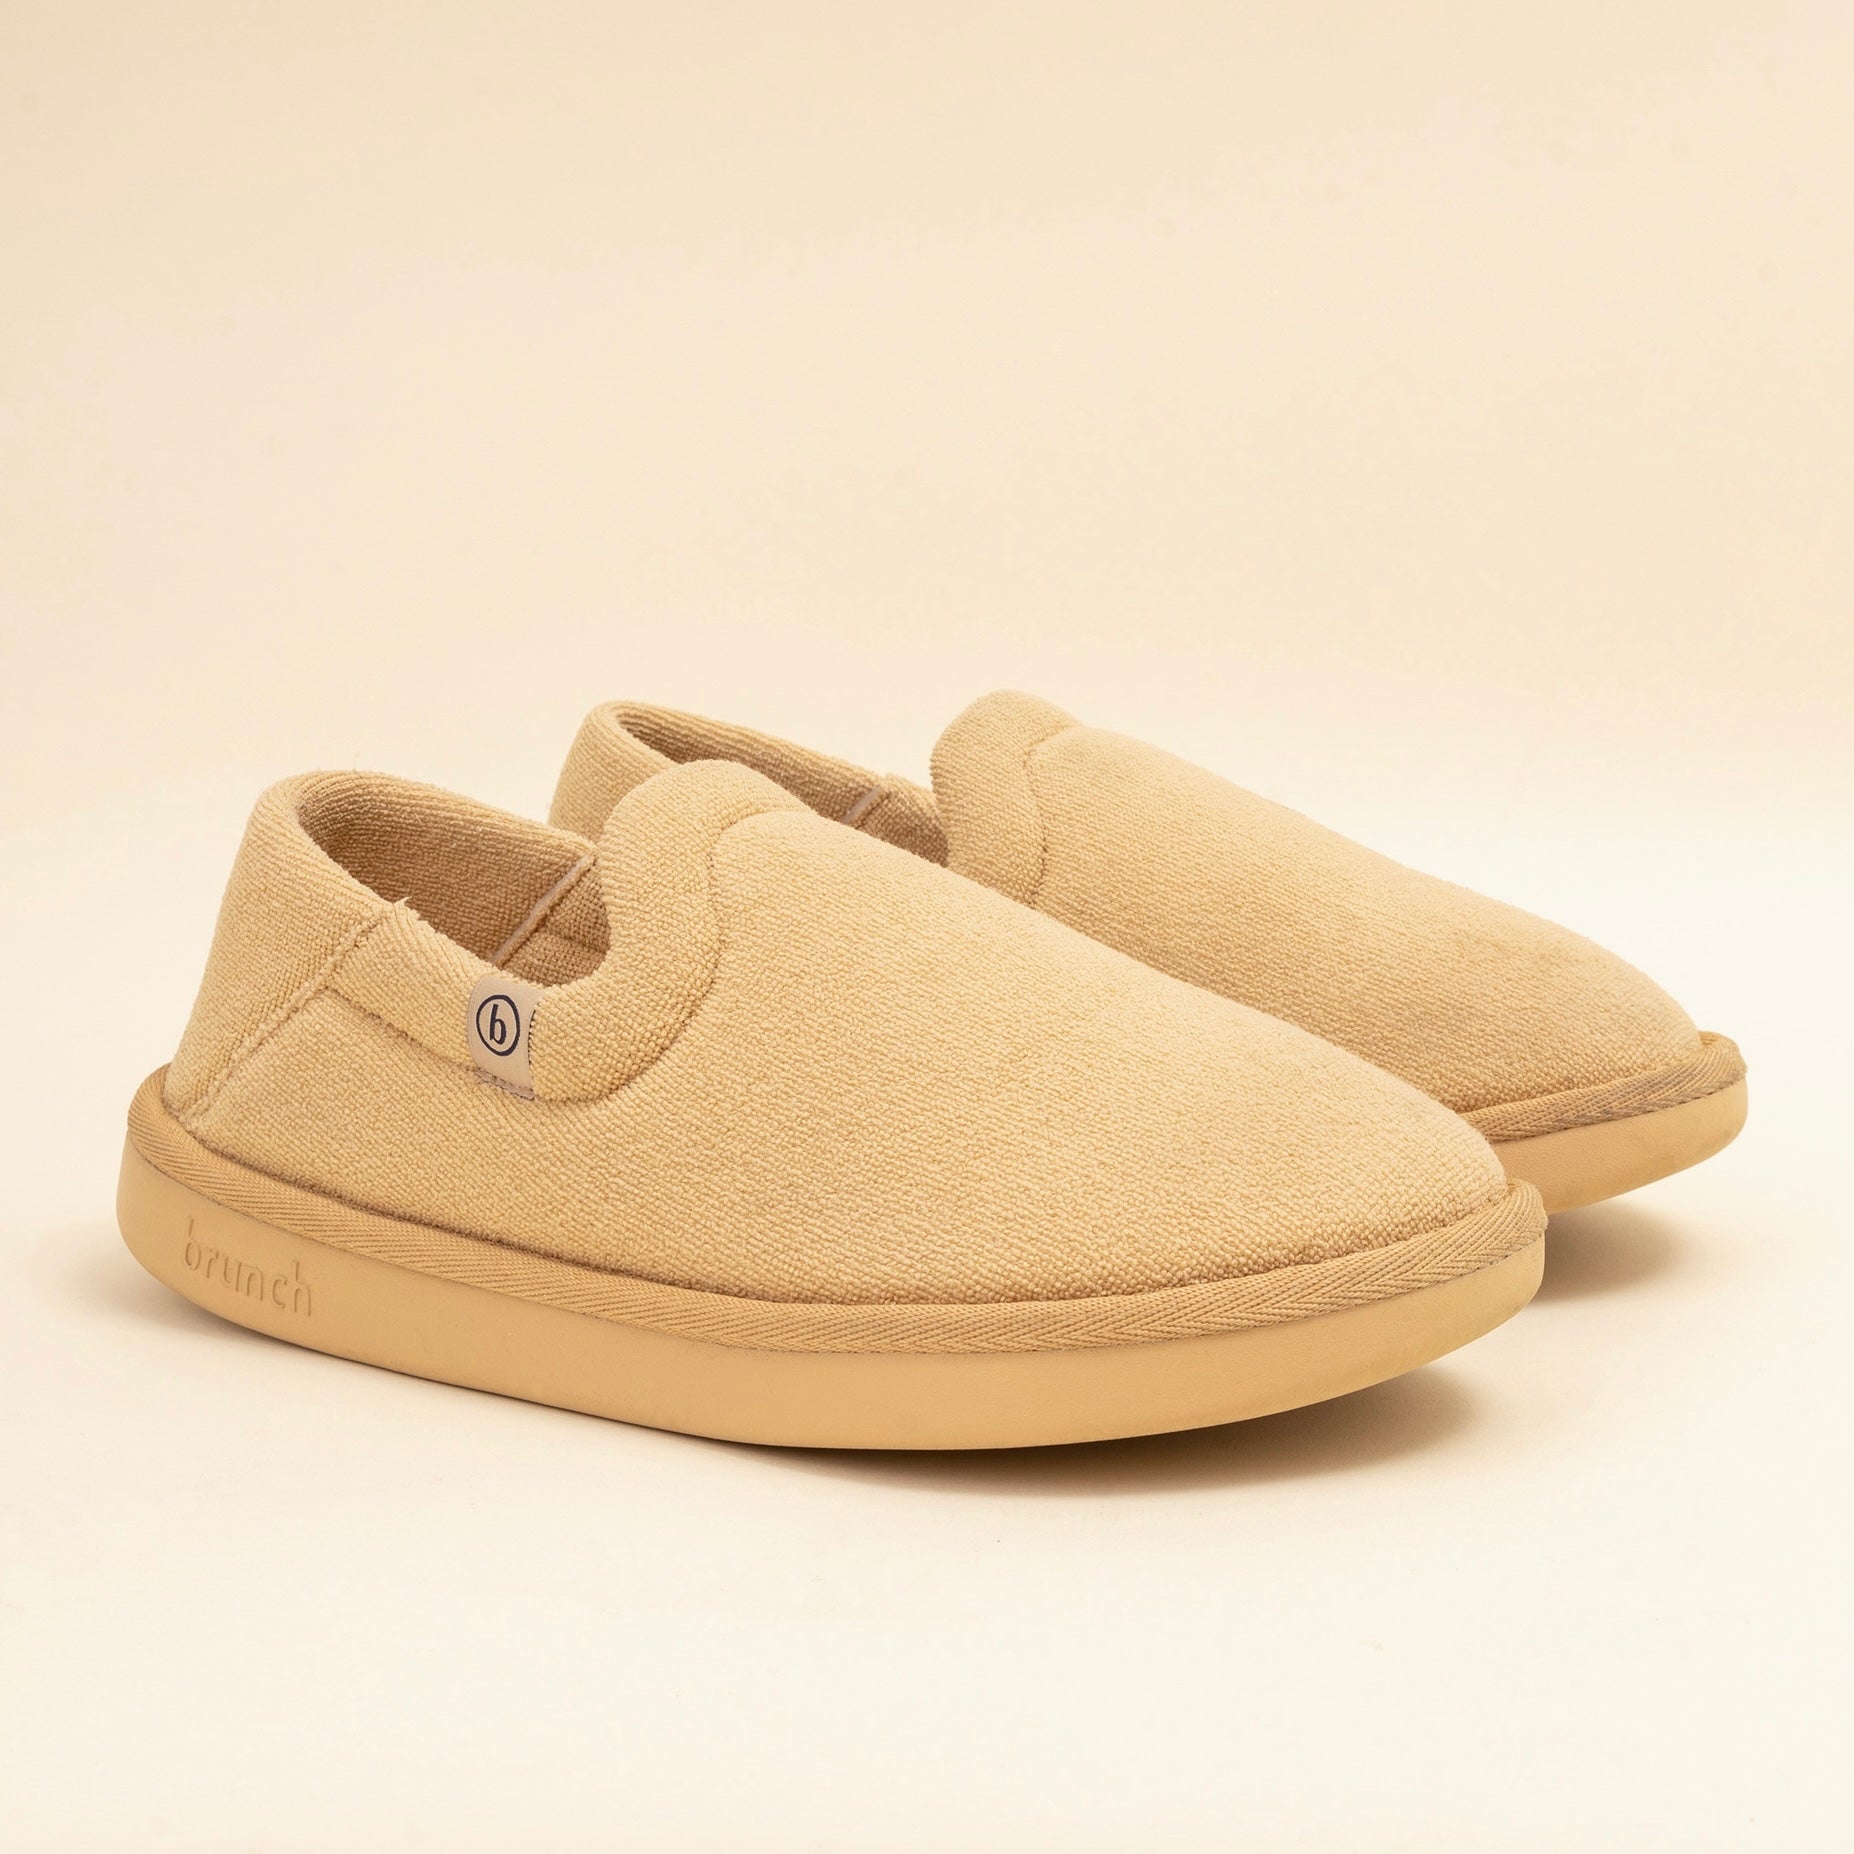 Luxury Slippers, Apparel & Accessories | Brunch Slippers